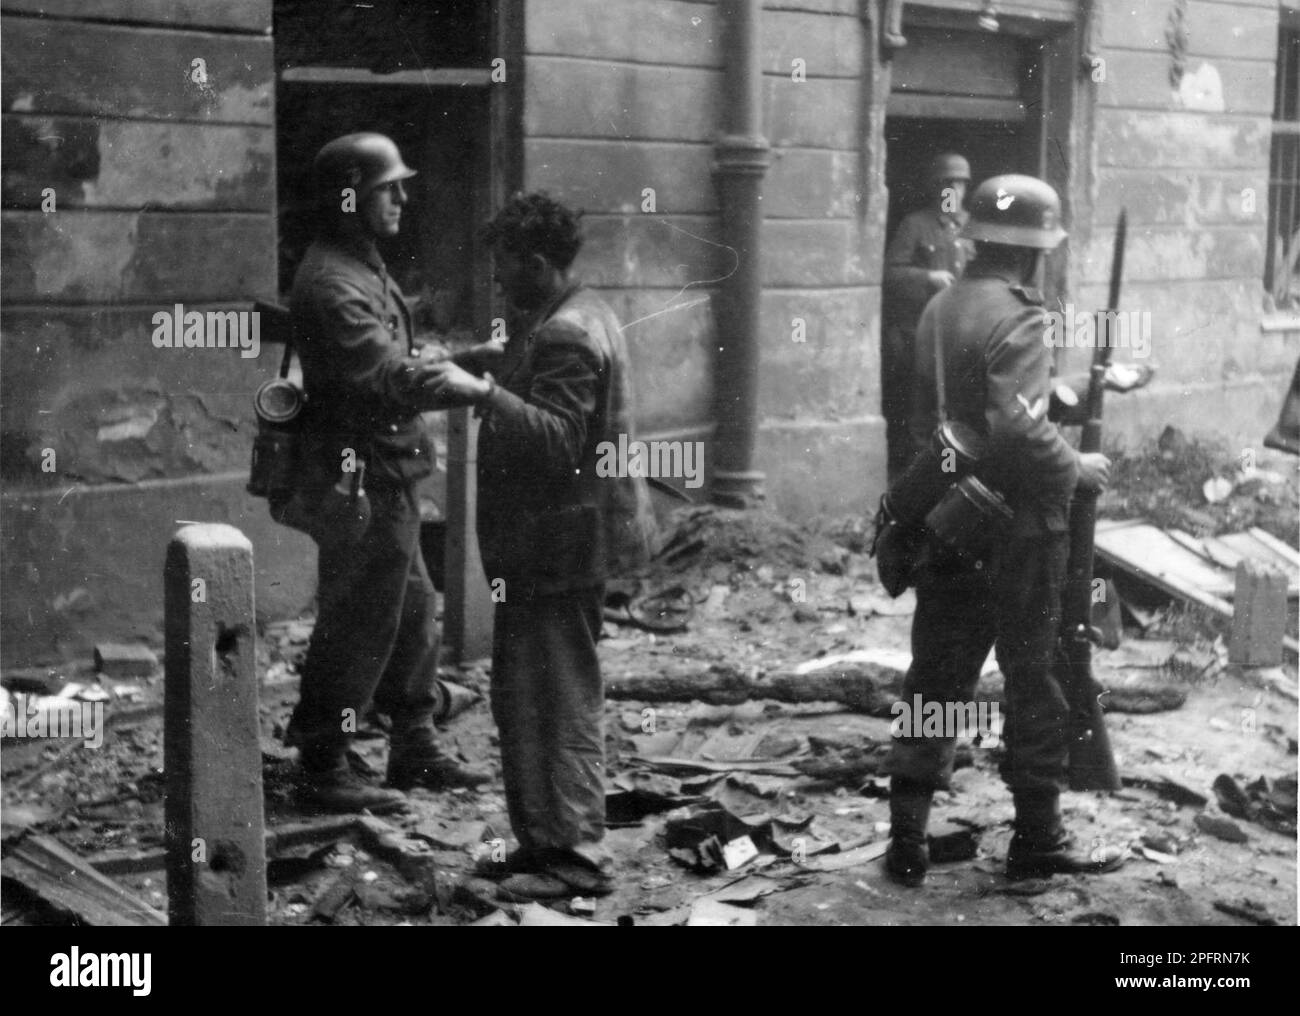 In January 1943 the nazis arrived to round up the Jews of the Warsaw Ghetto  The Jews, resolved to fight it out, took on the SS with homemade and primitive weapons. The defenders were executed or deported and the Ghetto area was systematically demolished. This event is known as The Ghetto Uprising. This image shows a  Jewish resistance fighter being searched by a soldier. This image is from the German photographic record of the event, known as the Stroop report. Stock Photo